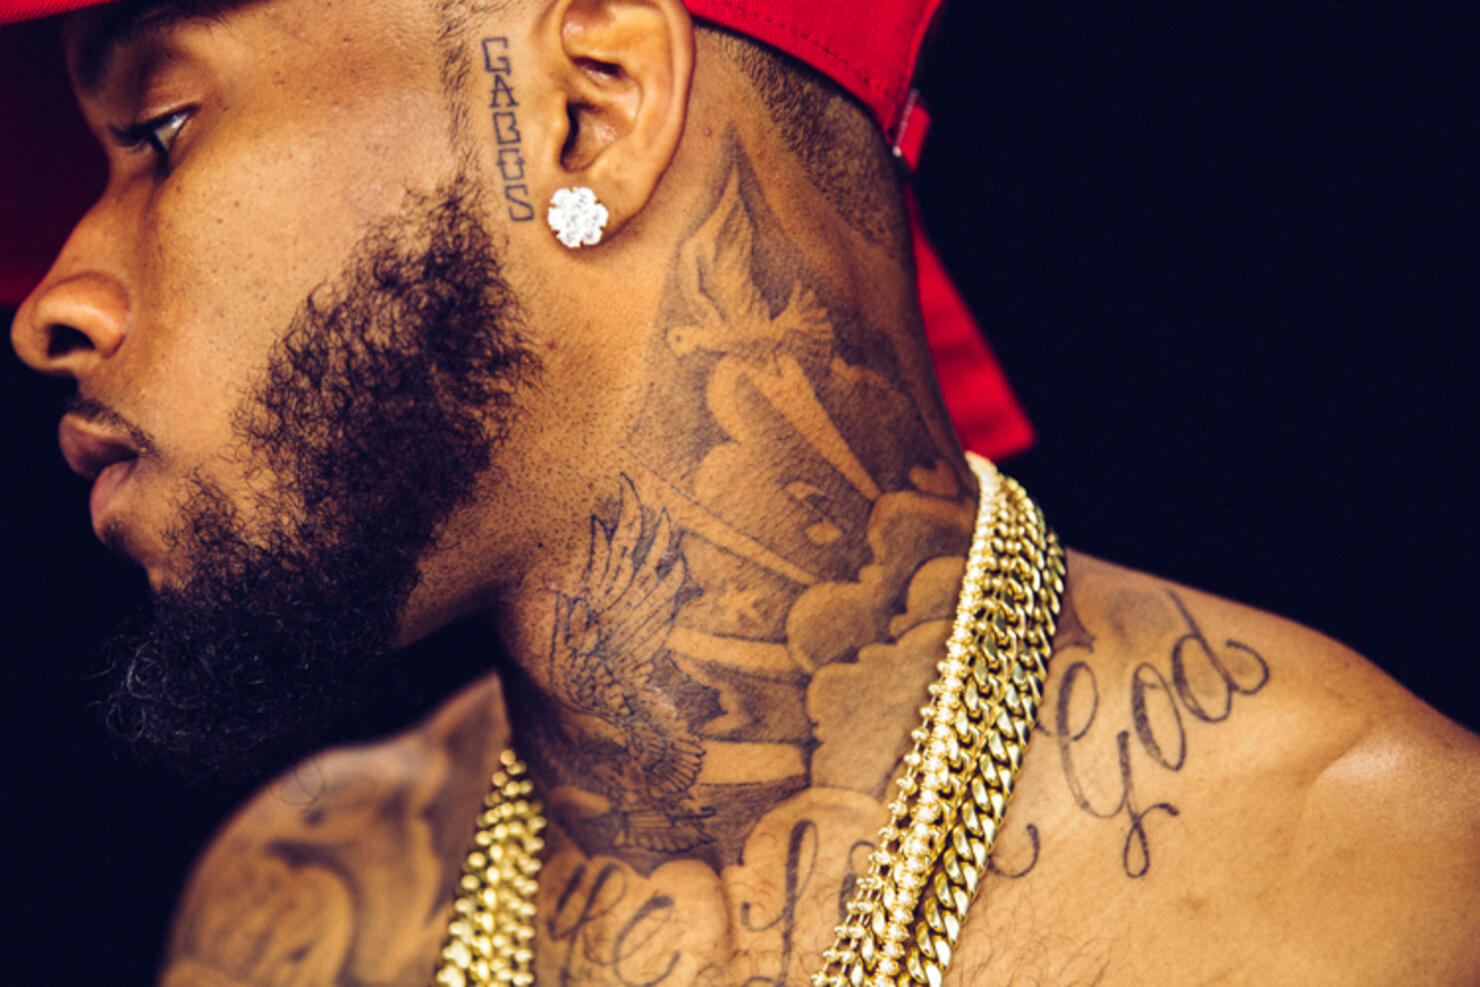 INTERVIEW: Tattoo Stories with Tory Lanez | iHeart